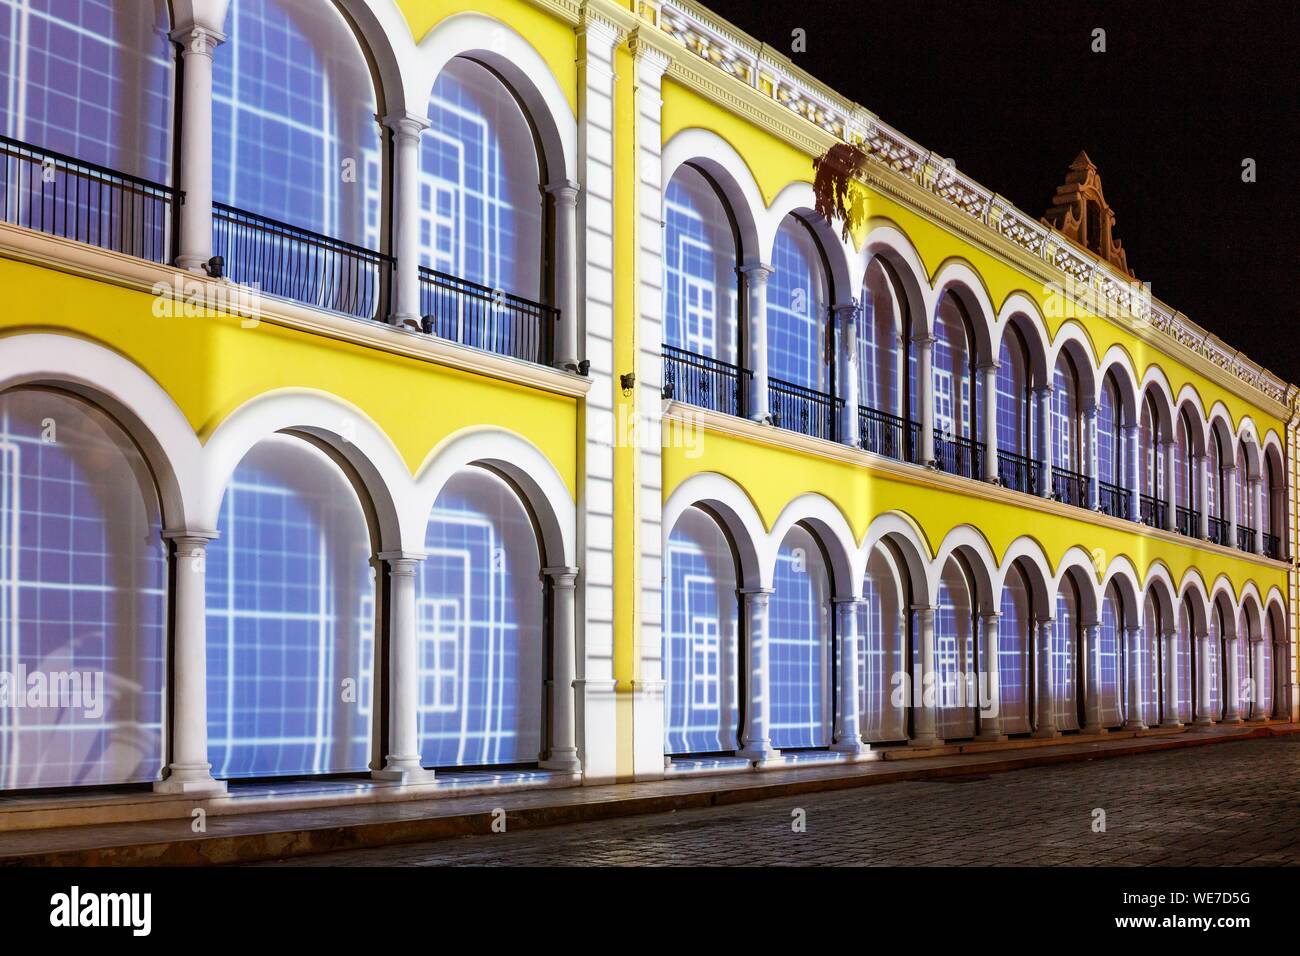 Mexico, Campeche state, Campeche, fortified city listed as World Heritage by UNESCO, town hall facade by night Stock Photo